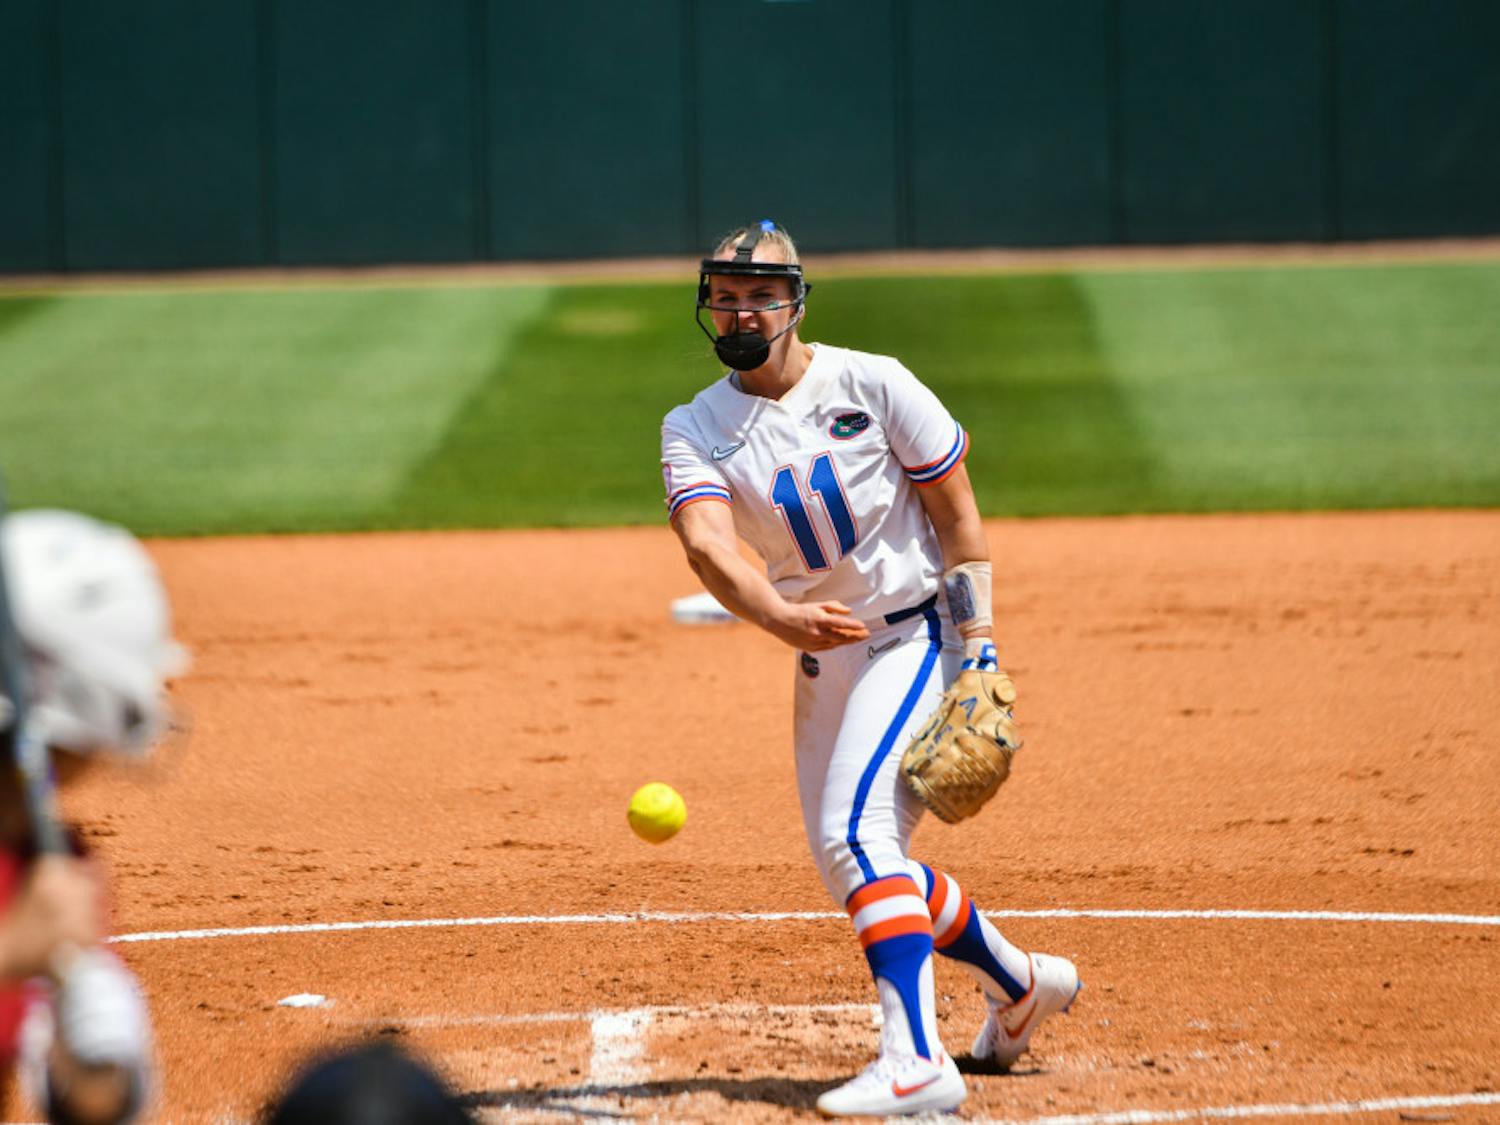 UF senior Kelly Barnhill pitched her second complete game of the weekend against Arkansas on Sunday. She allowed only two hits and one earned run to go along with eight strikeouts.